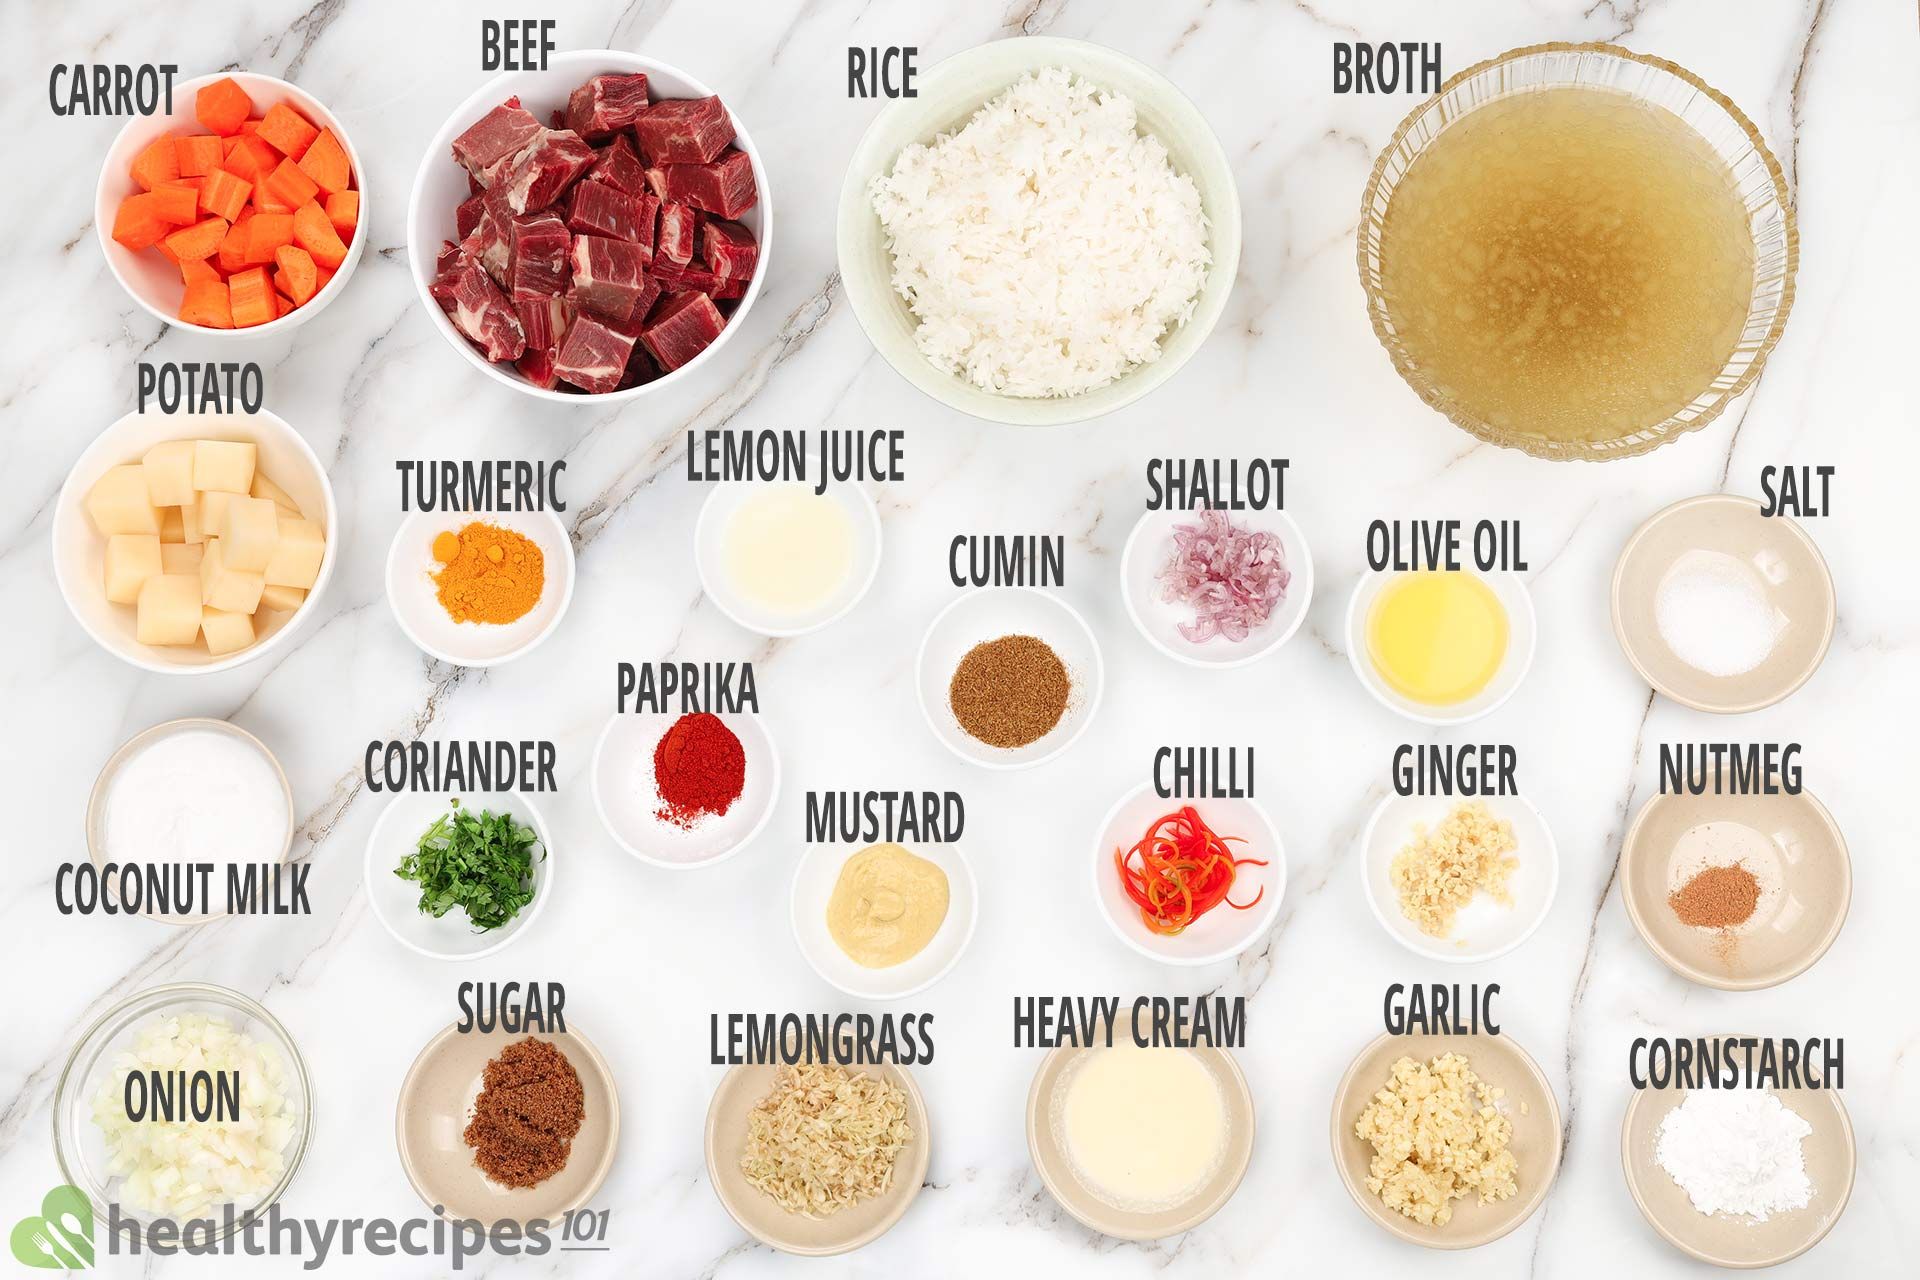 Beef Curry Ingredients